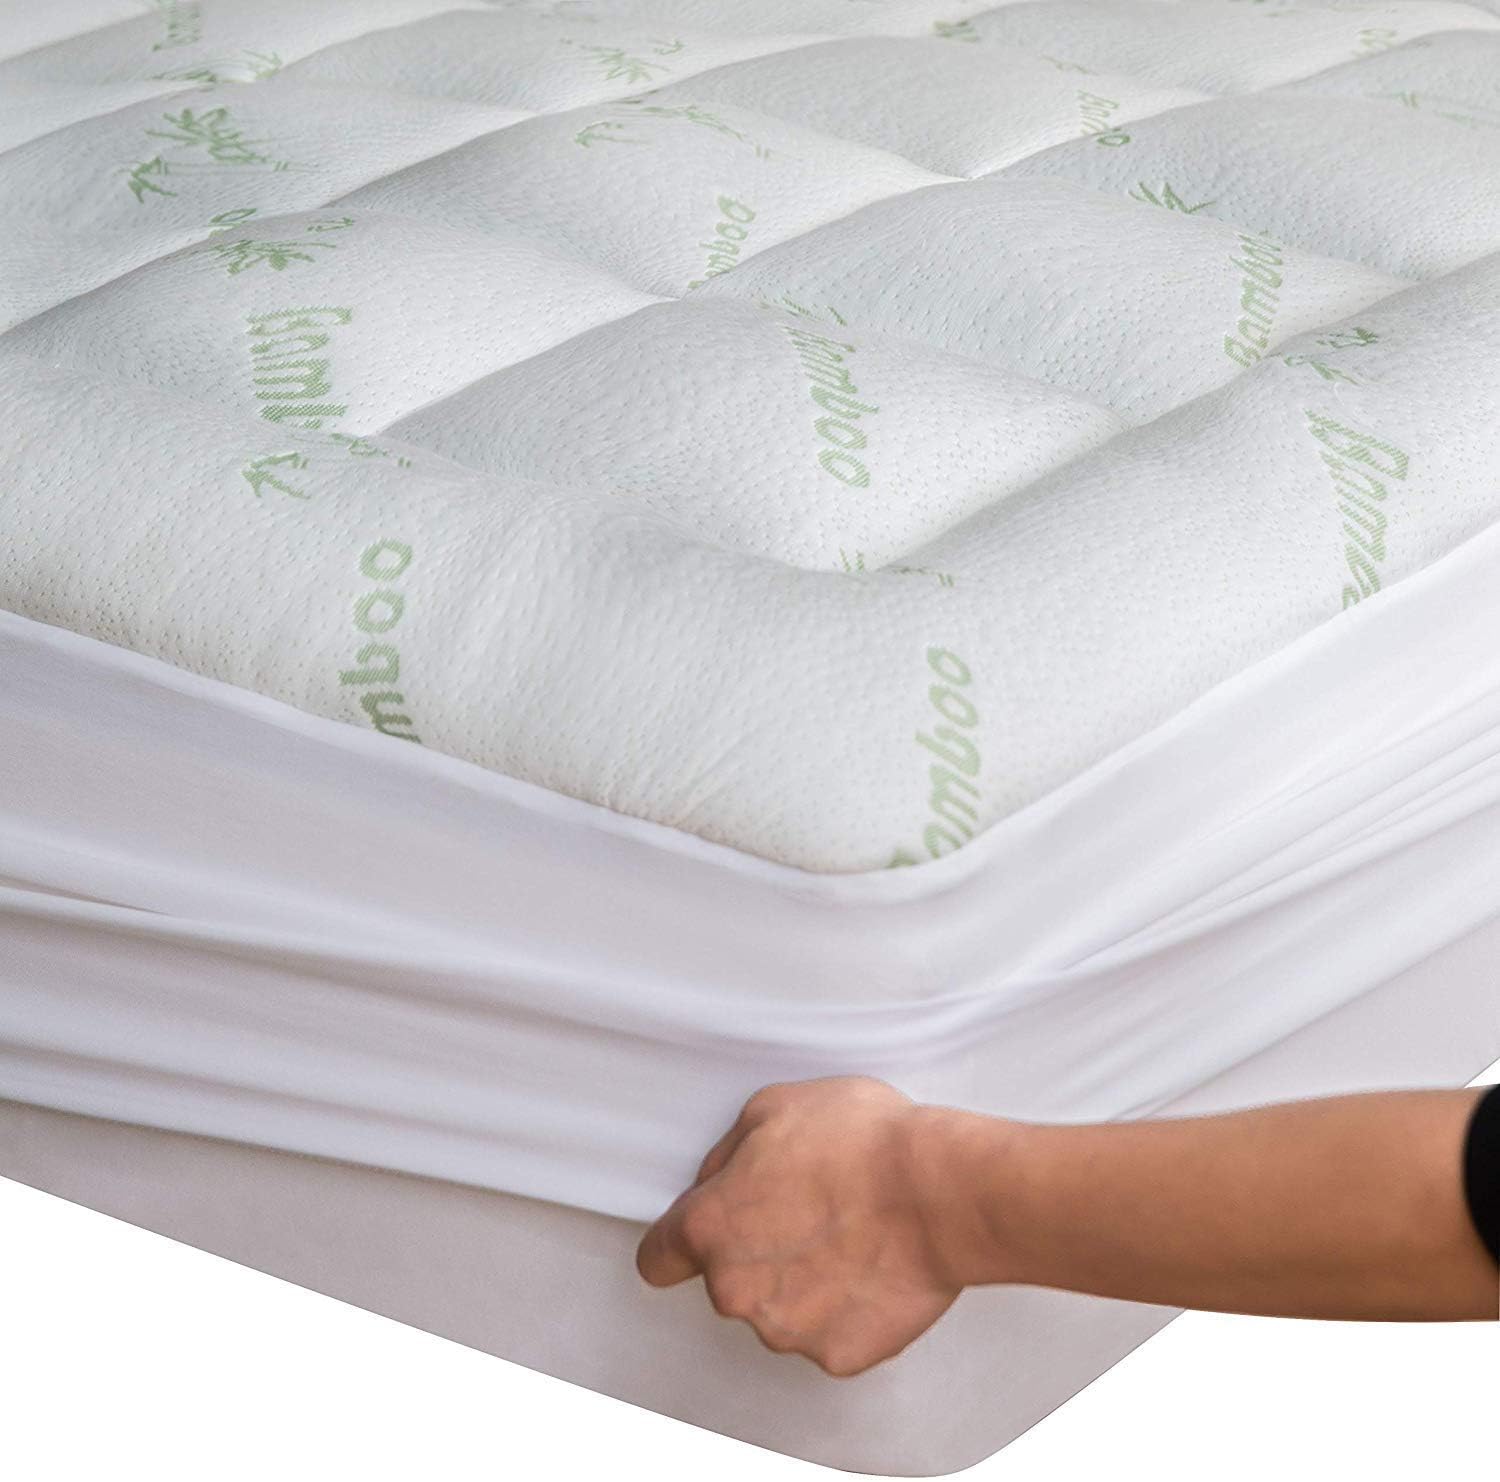 Bamboo Full Mattress Topper - Thick Cooling Breathable Pillow Top Mattress Pad for Back Pain Relief - Deep Pocket Topper Fits 8-20 Inches Mattress (Viscose Made from Bamboo, 54x75 Inches)